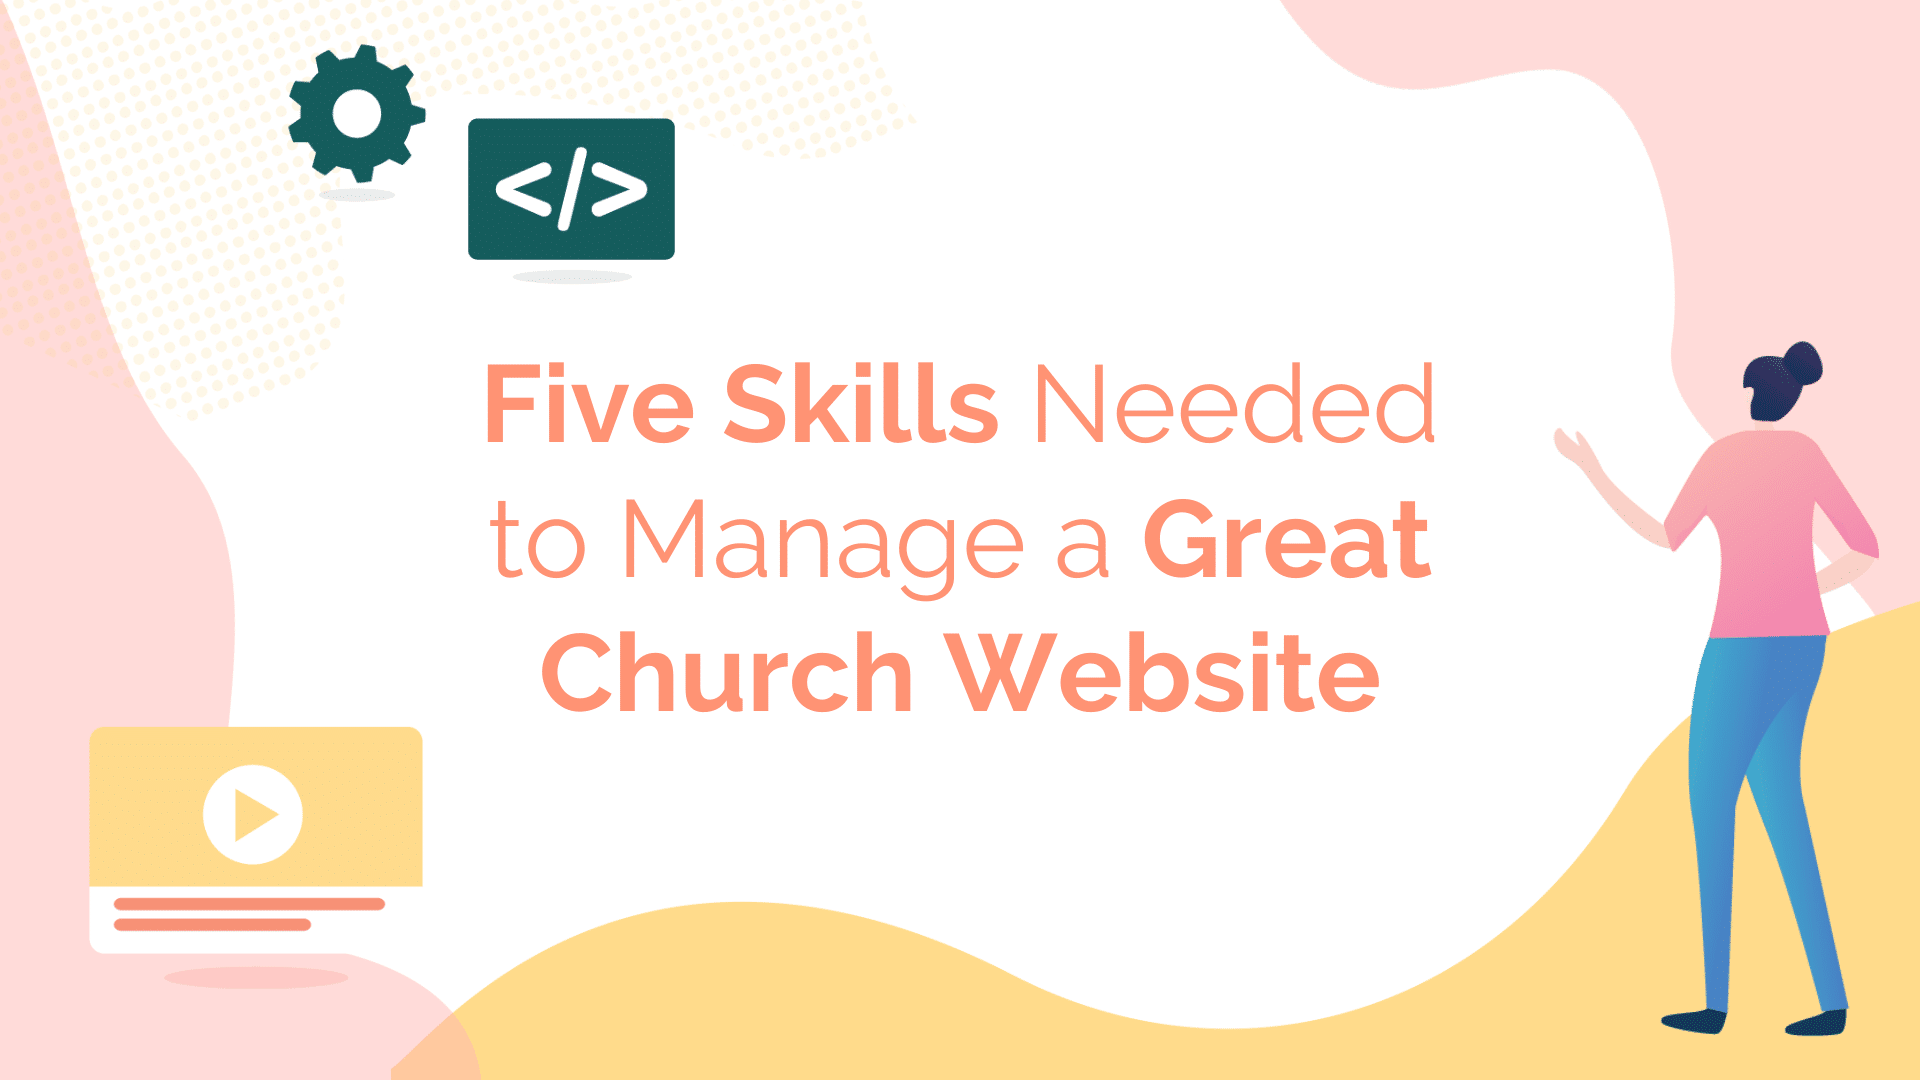 What should a church website do?